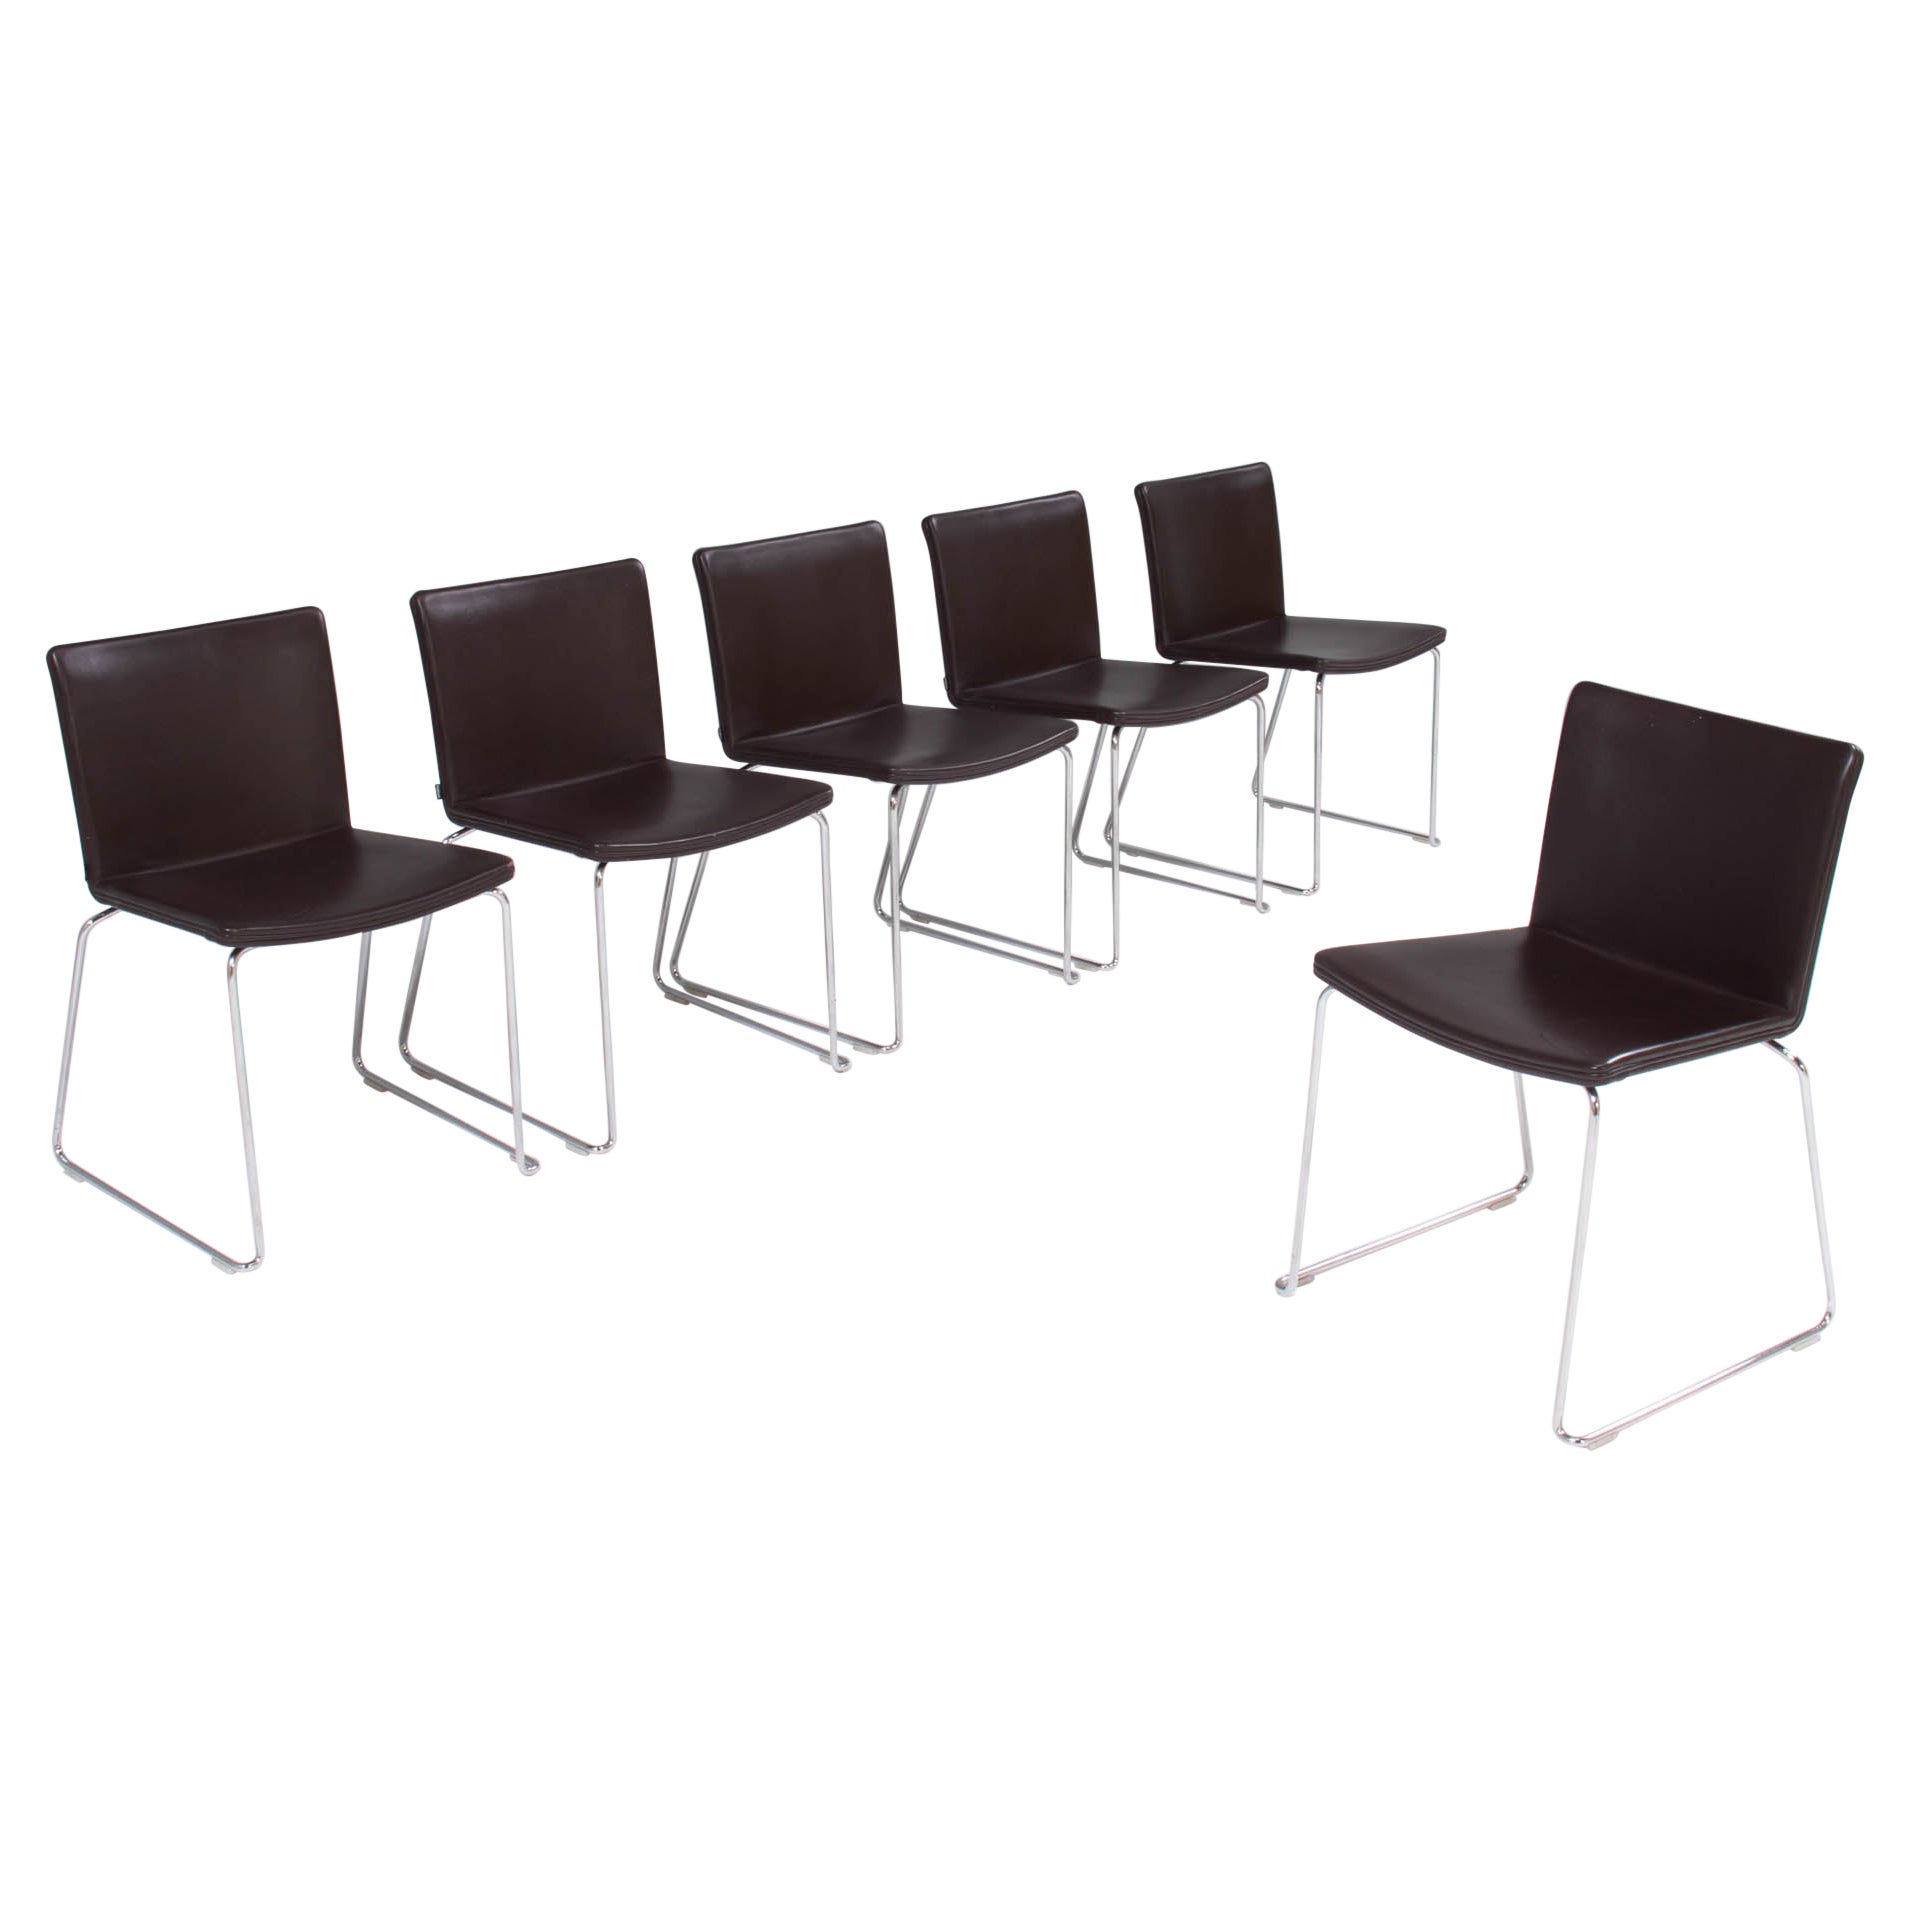 Poliform by Mario Mazzer Nex Brown Leather Dining Chair, Set of 6